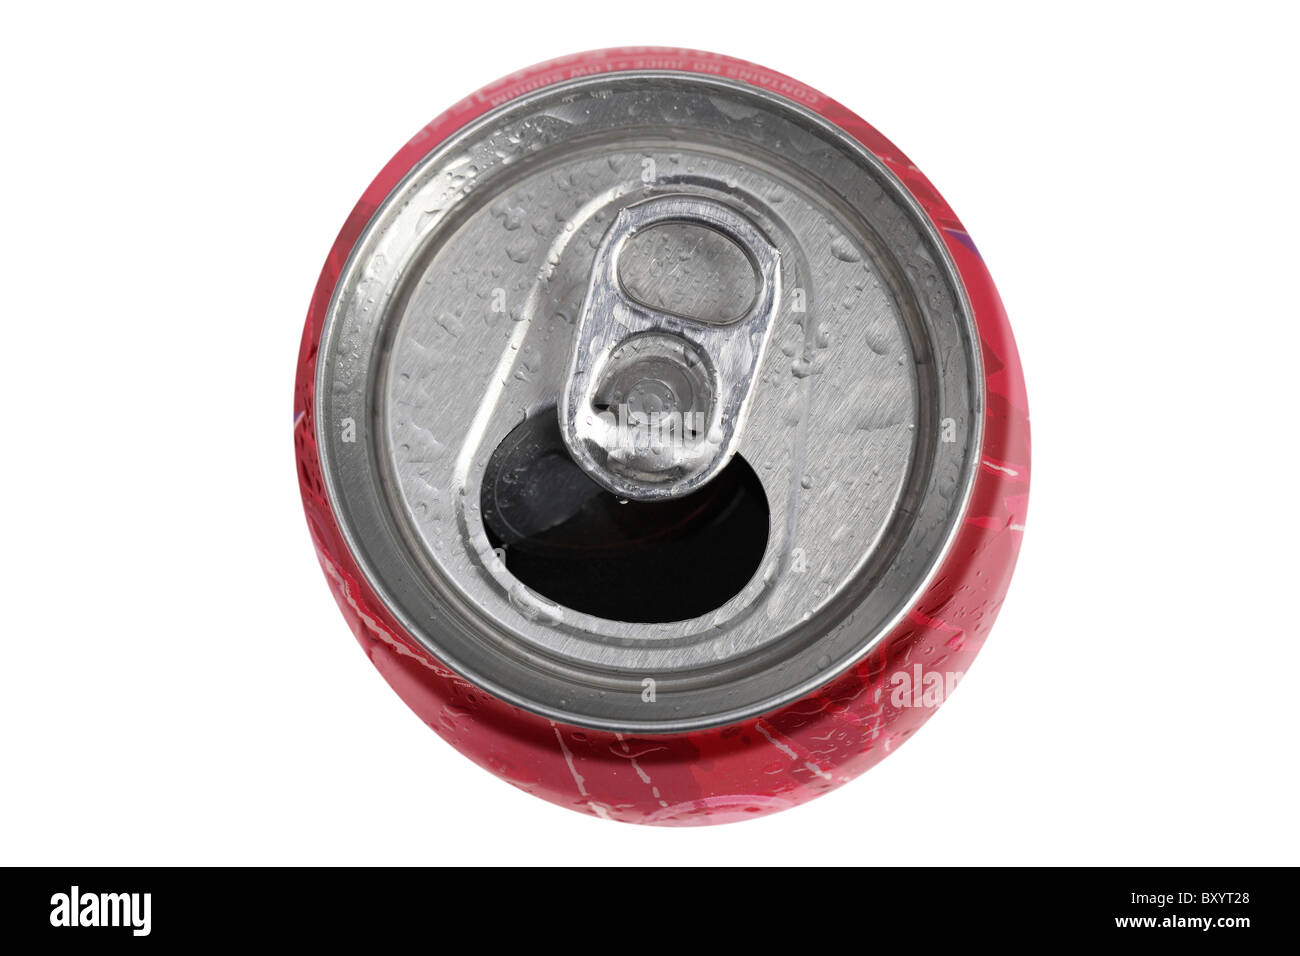 Soda can on white background Stock Photo